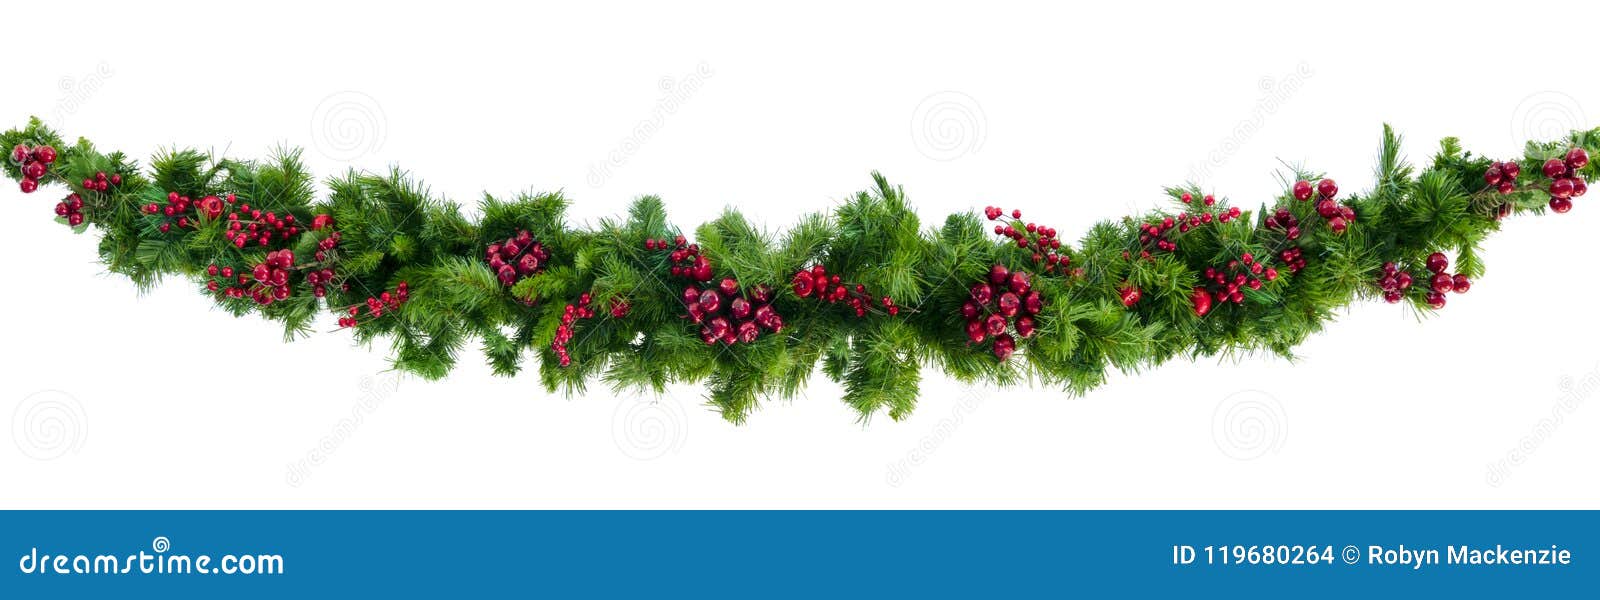 christmas garland with red berries  on white